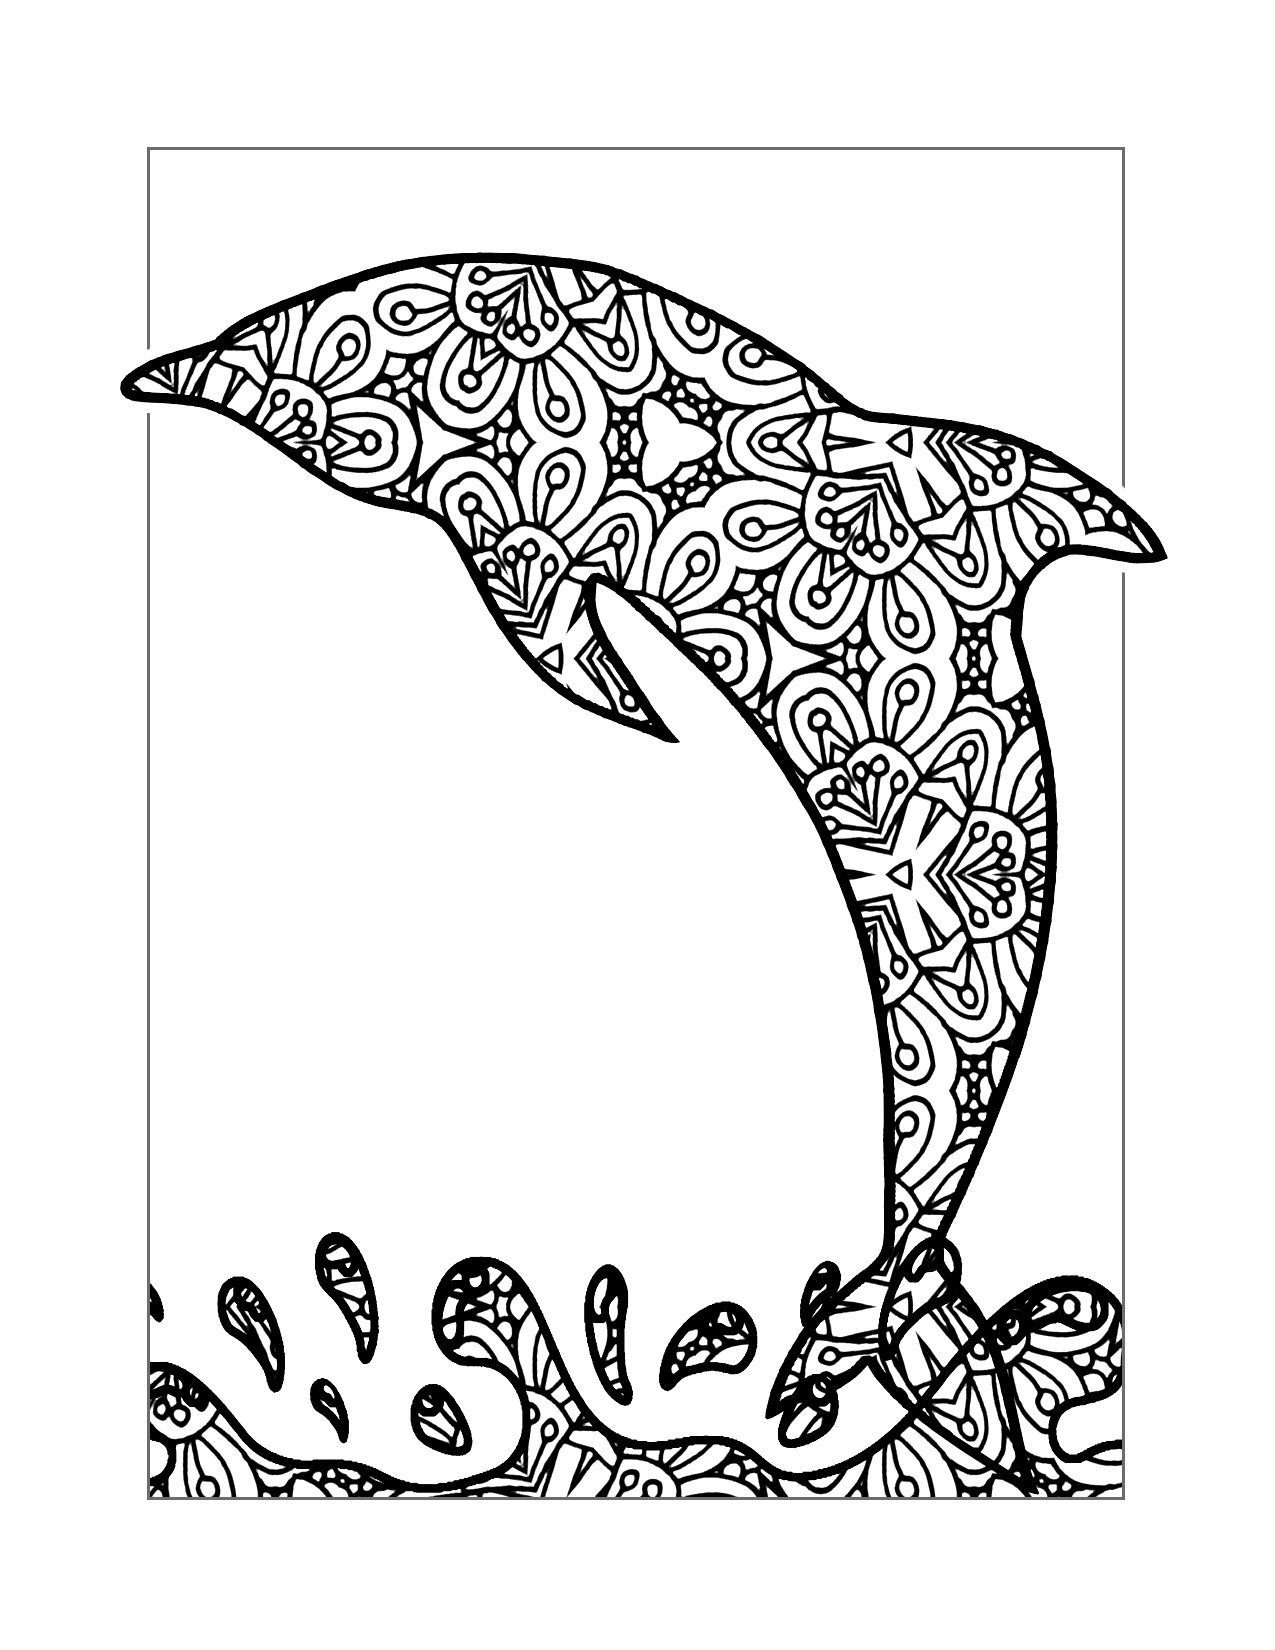 Zen Dolphin Coloring Page